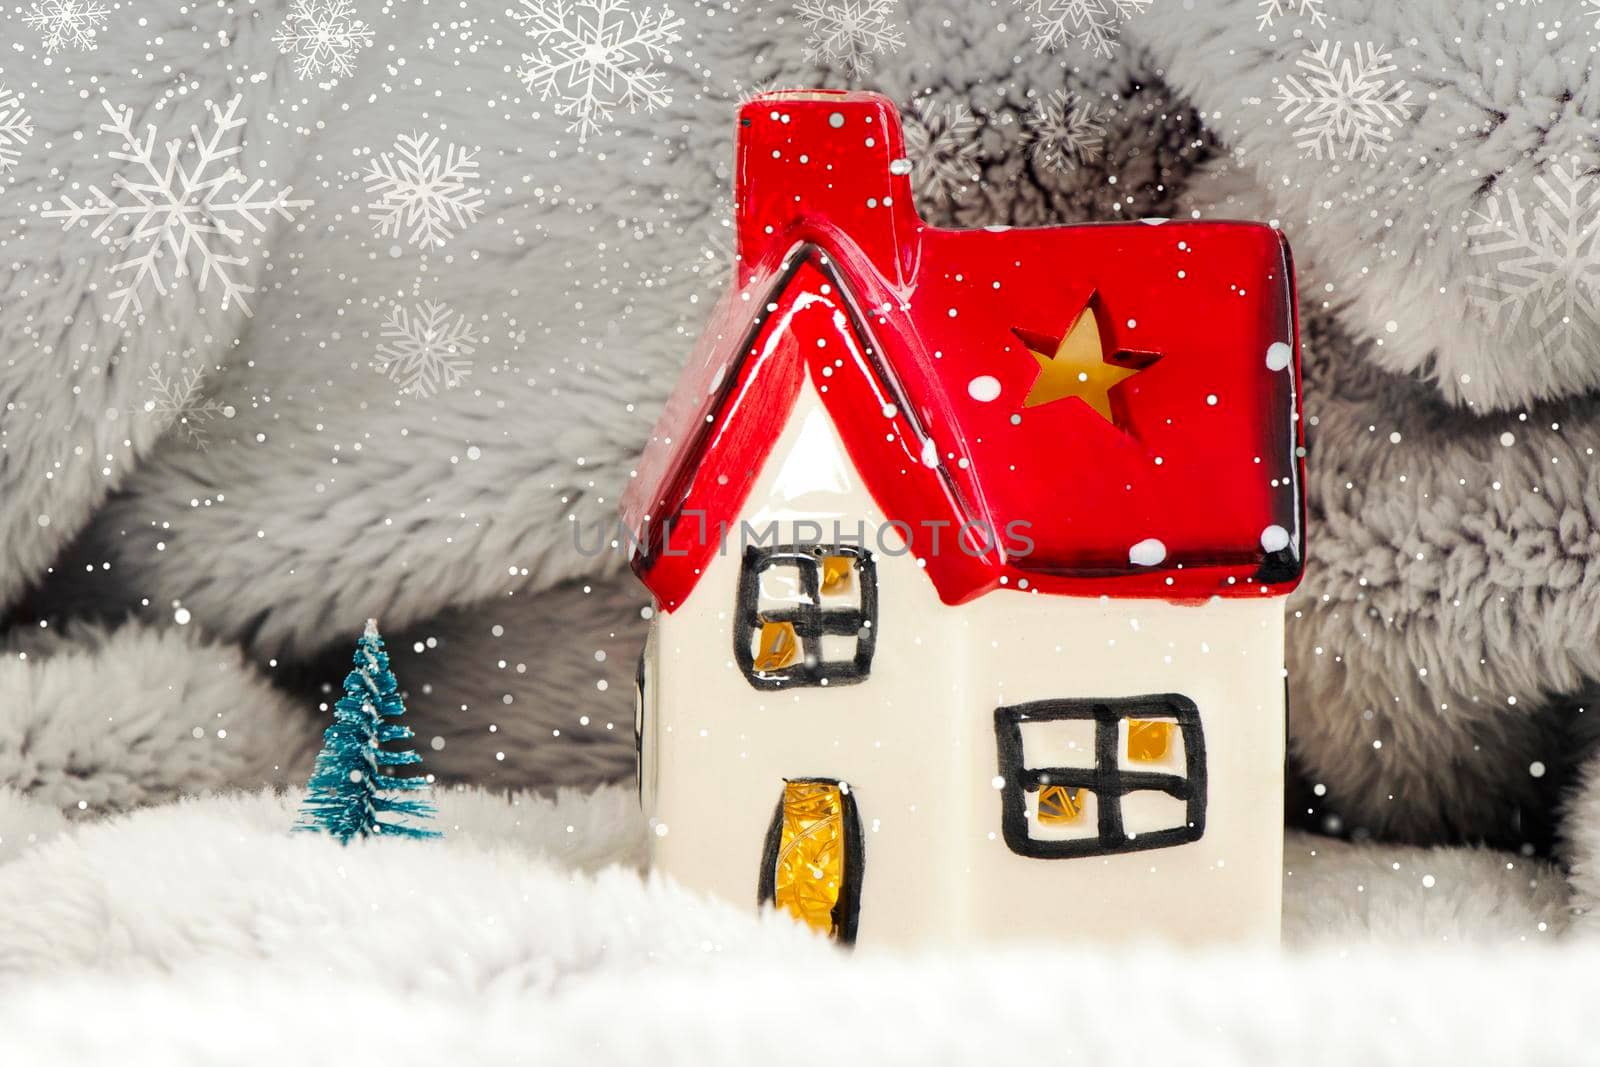 Toy house with red roof, pine tree and snow. New year decoration. by Taidundua